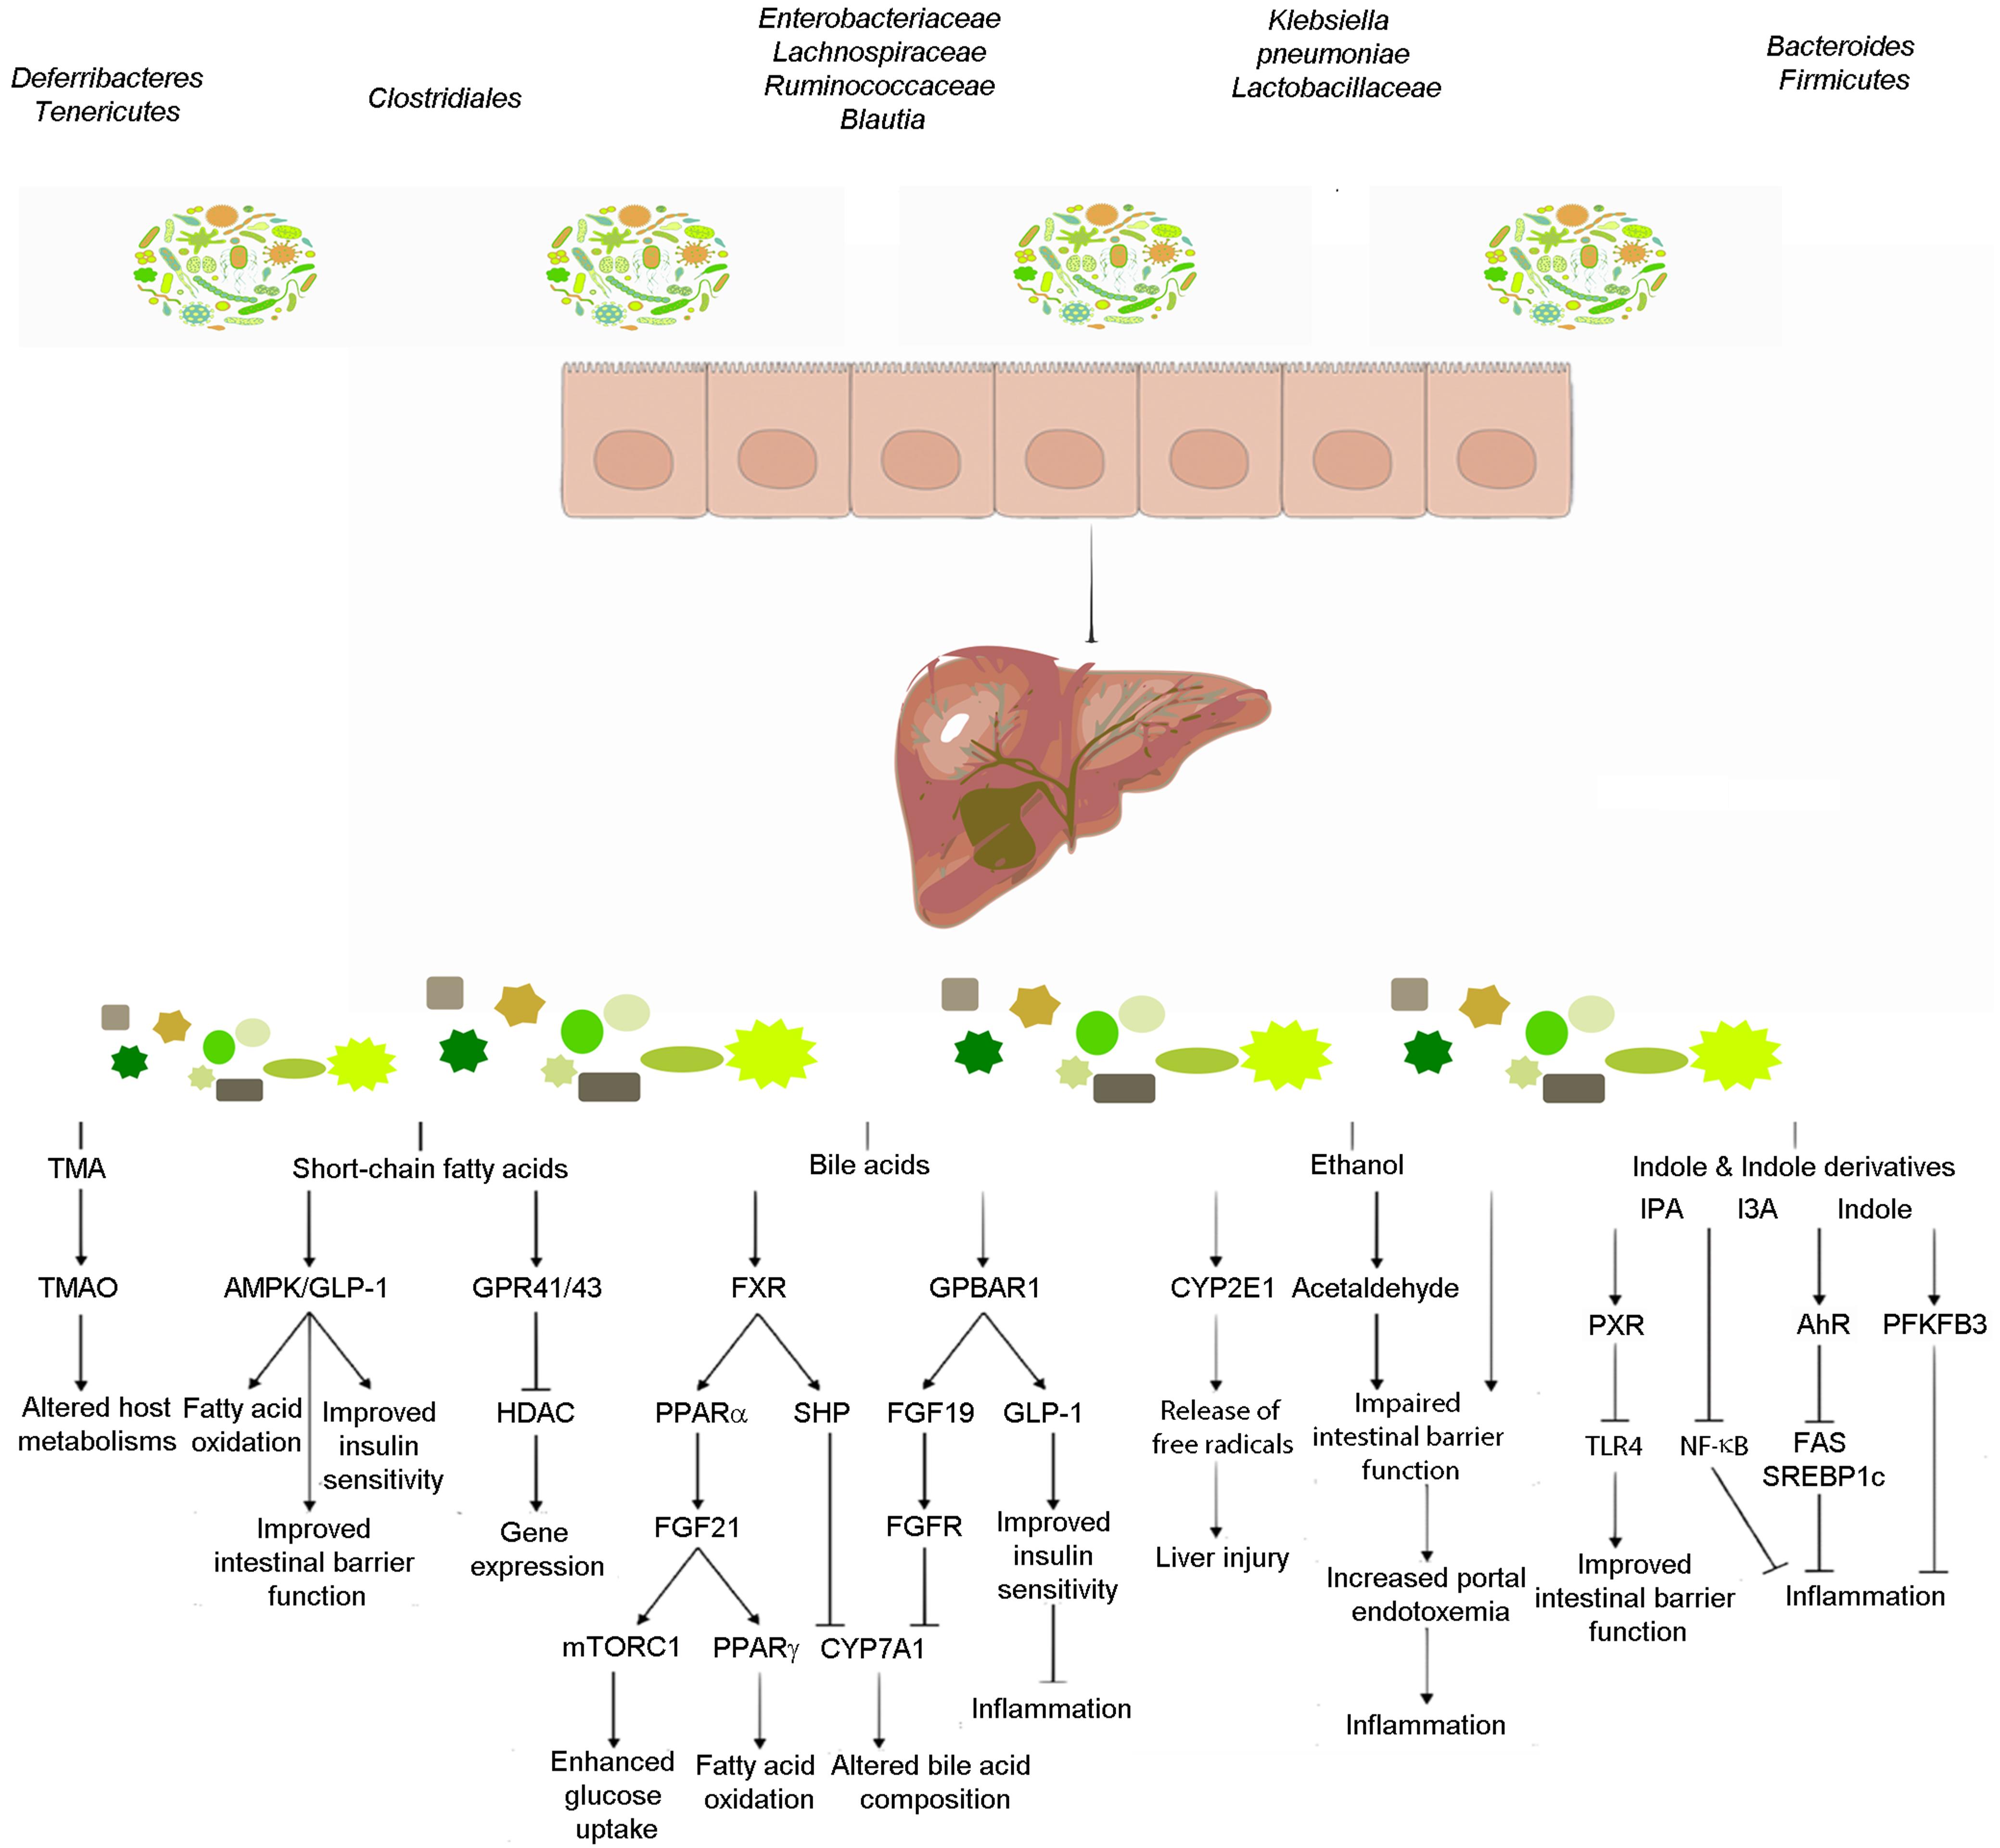 Gut microbiota-derived metabolites are involved in the progression of nonalcoholic fatty liver disease.